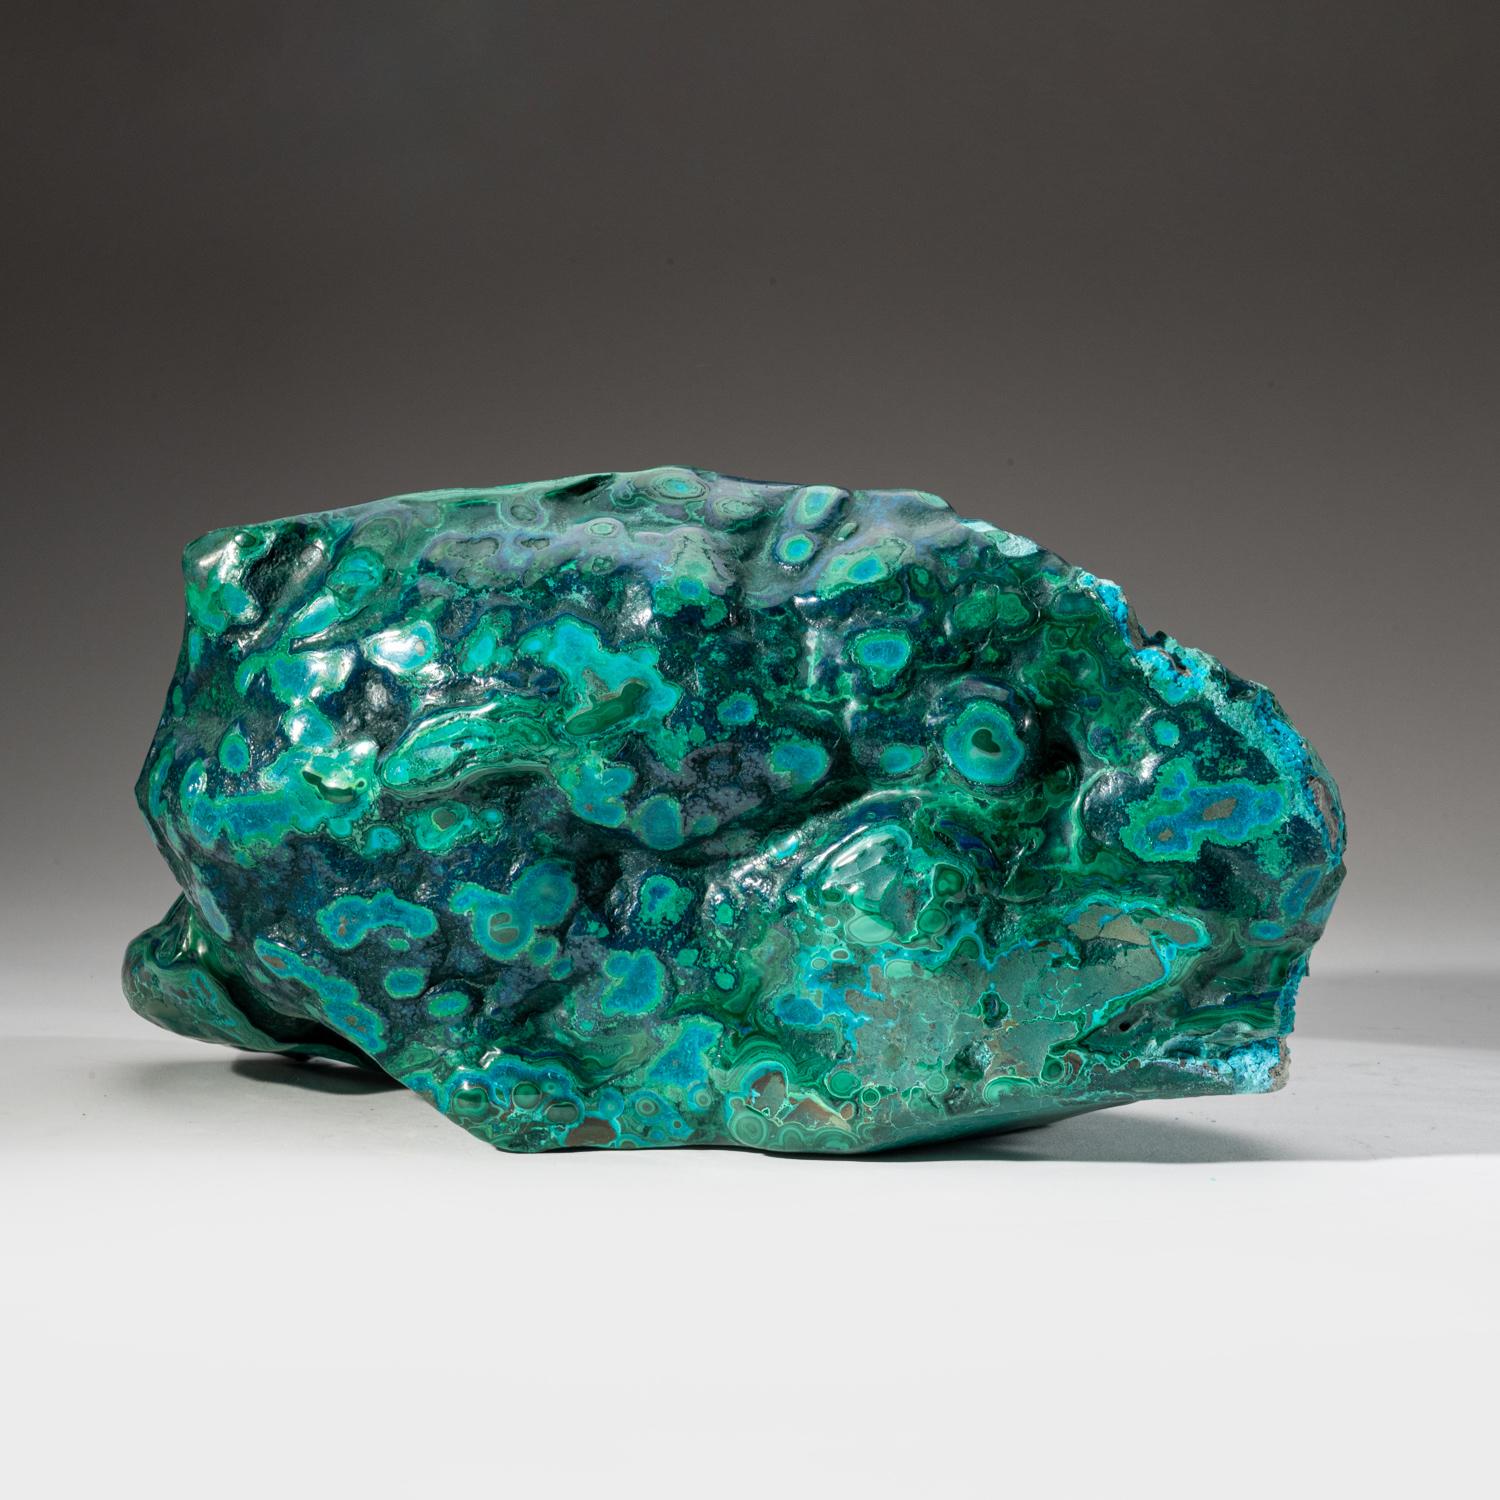 Congolese Genuine Polished Malachite and Azurite Freeform (10 lbs) For Sale